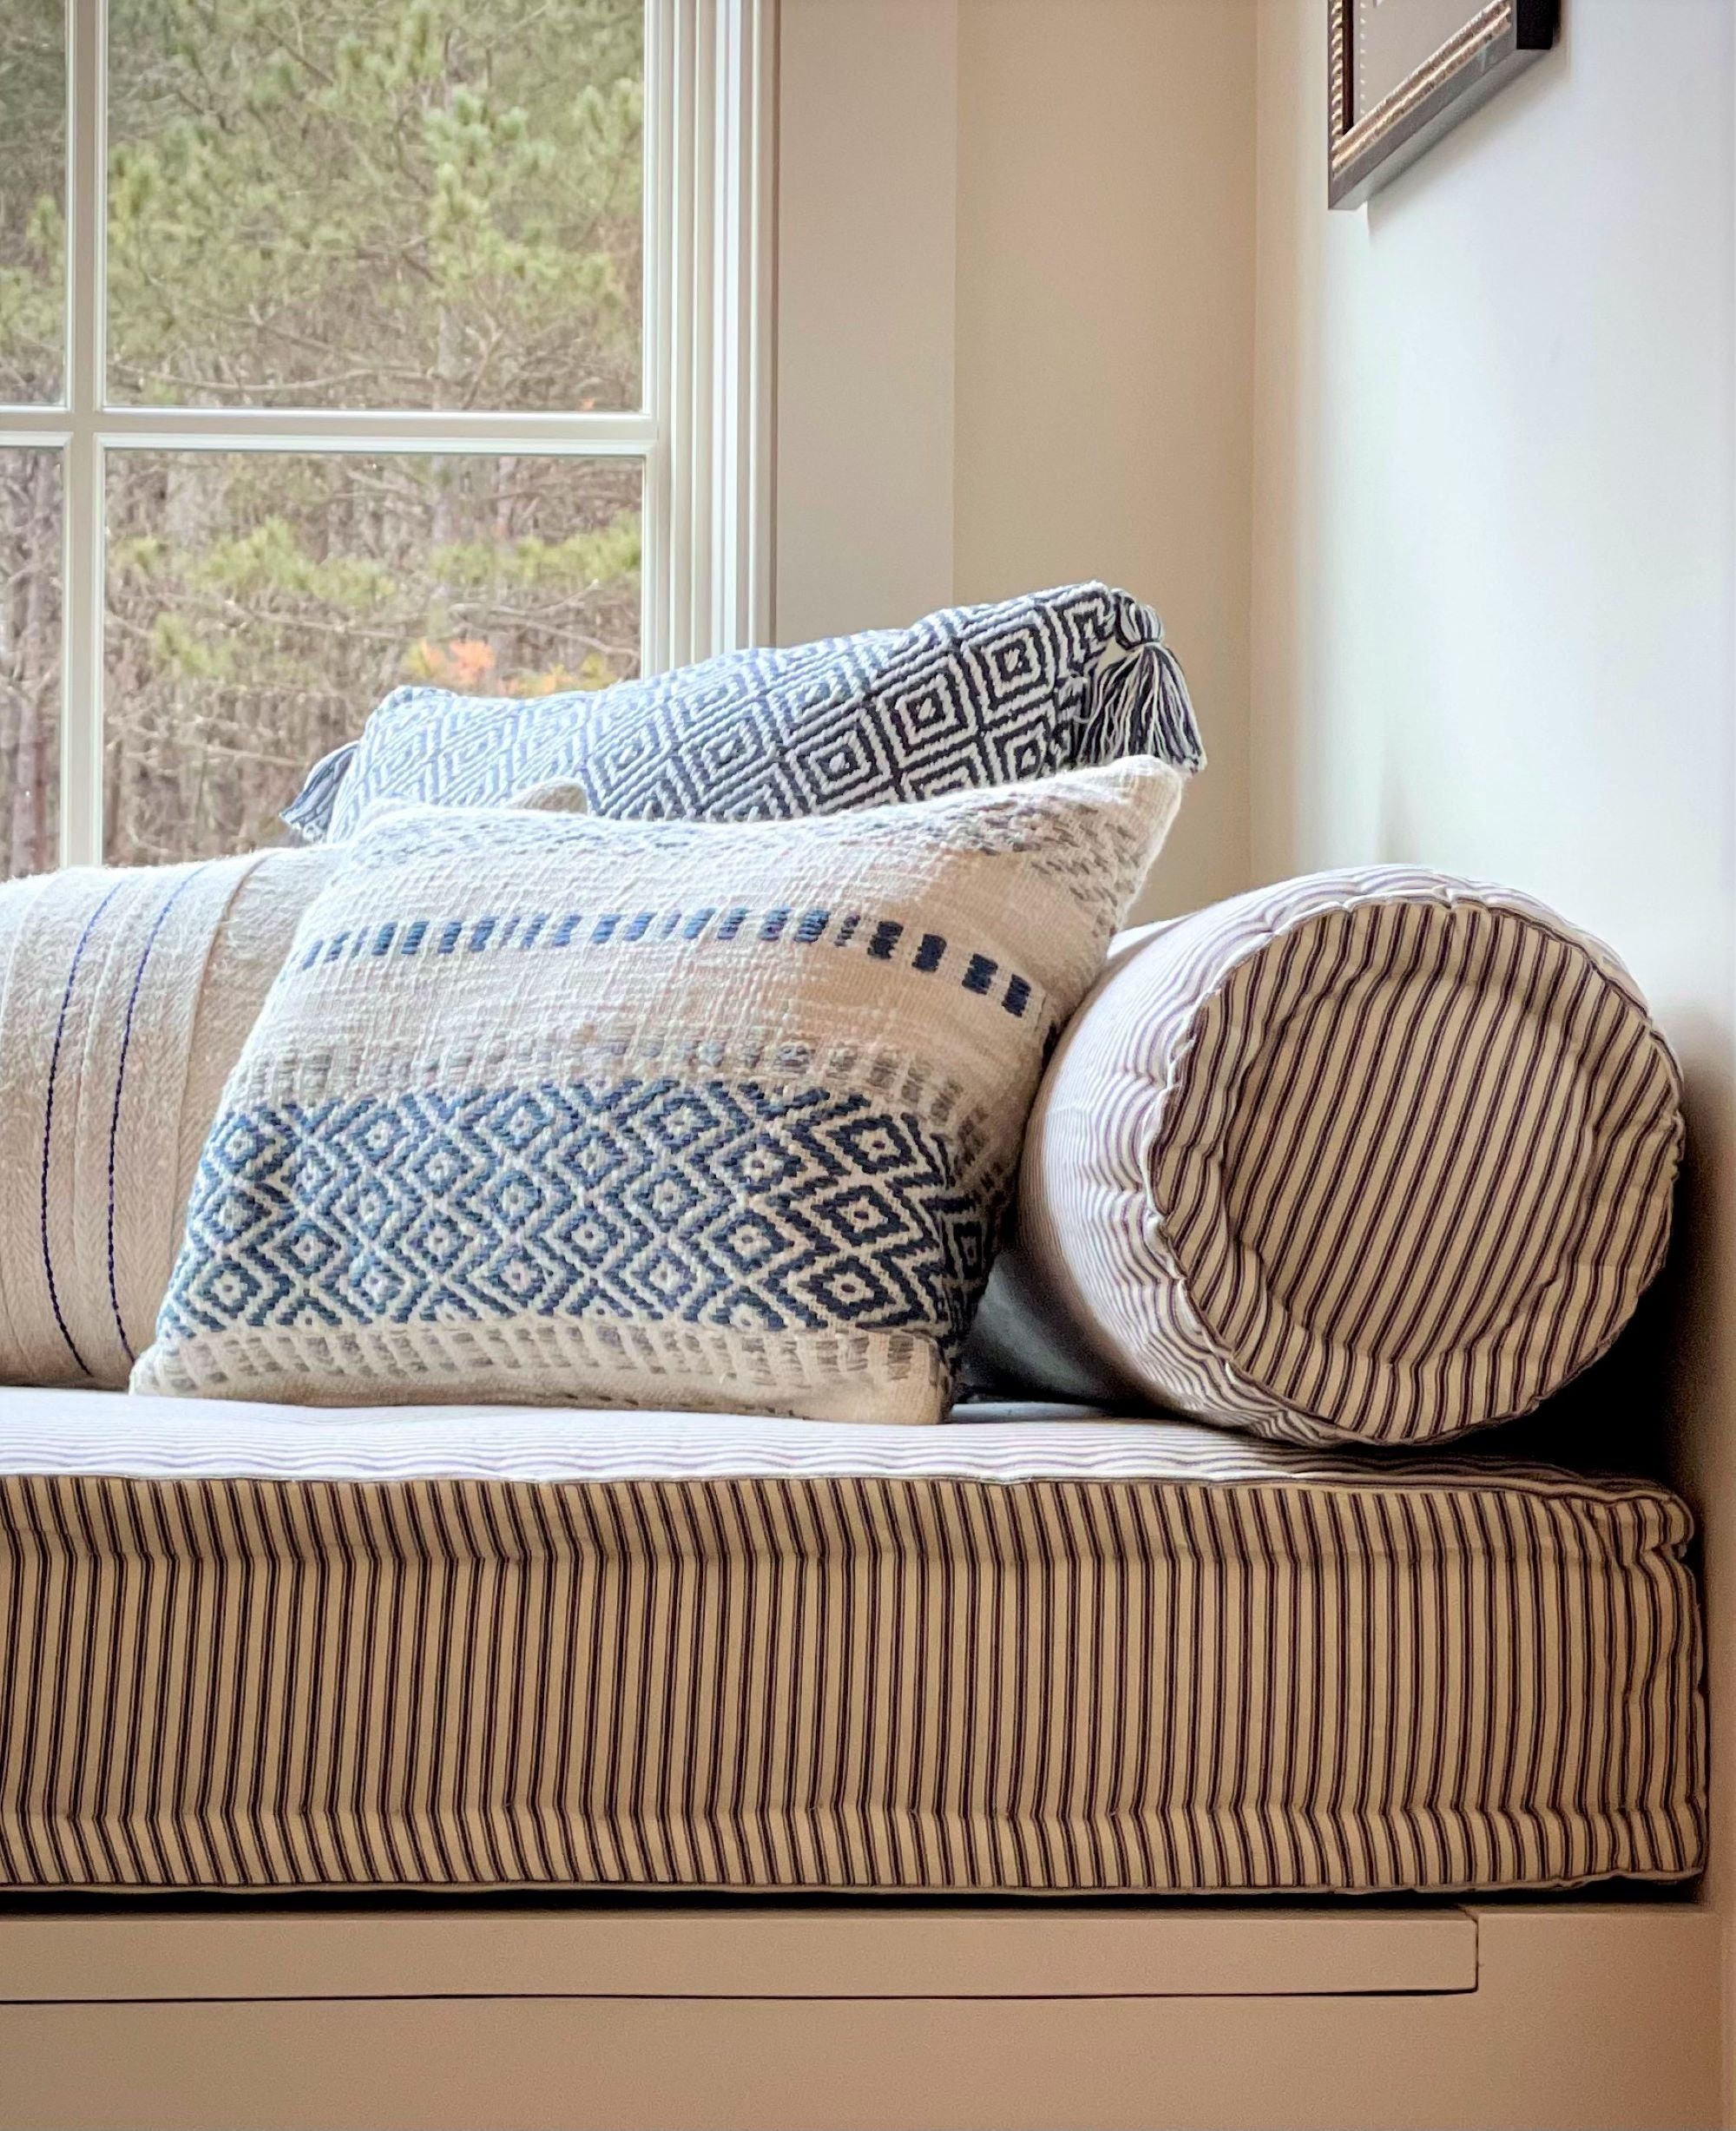 Bolster Pillows: Adding Comfort and Style to Your Home Decor